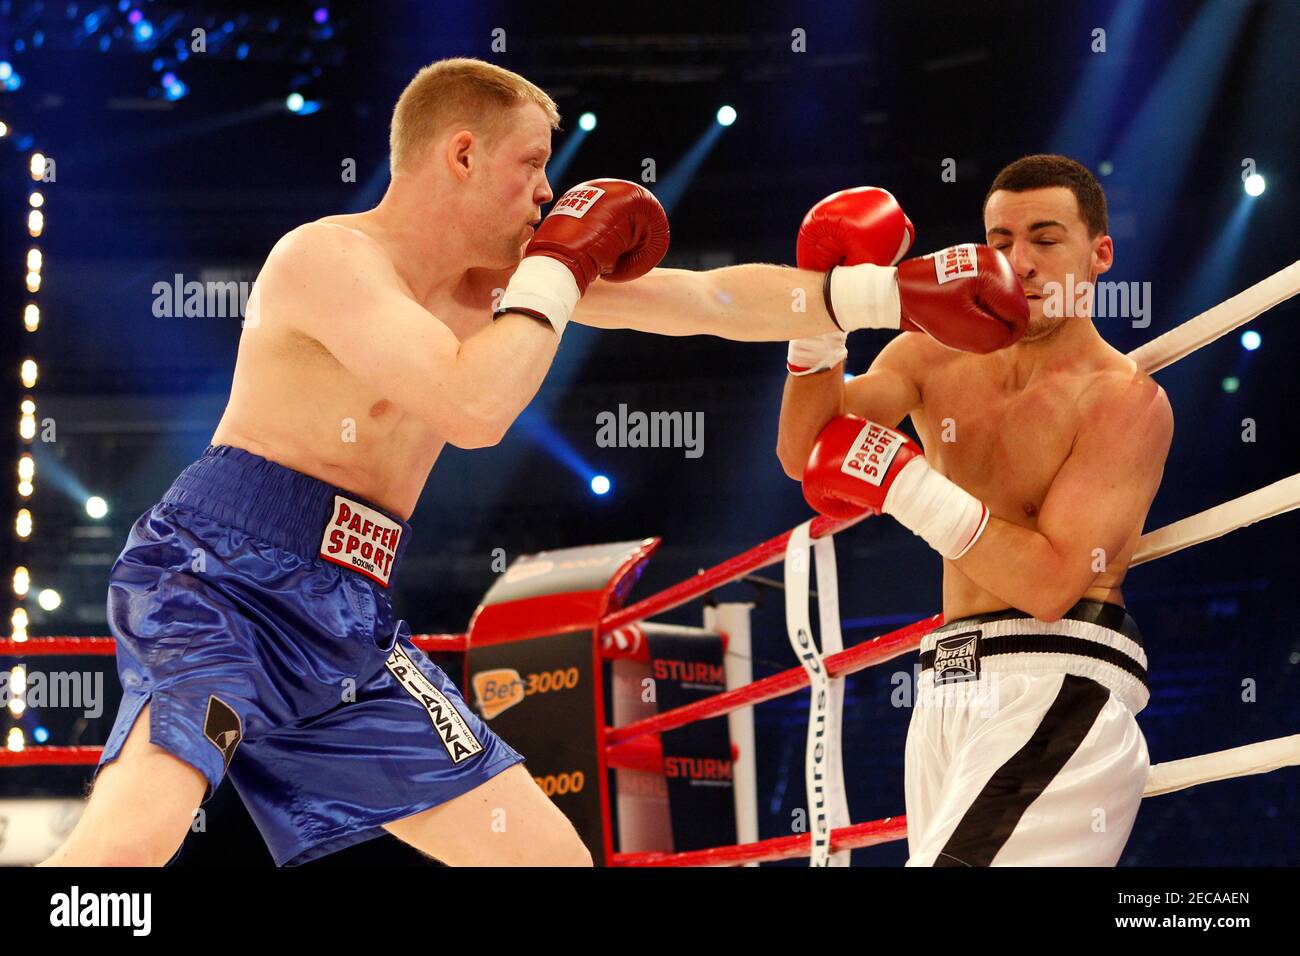 Boxing - Manuel Faisst v Torsten Roos - Light Middleweight - Lanxess Arena,  Cologne, Germany - 25/6/11 Manuel Faisst (R) in action against Torsten Roos  Mandatory Credit: Action Images / Paul Harding Stock Photo - Alamy